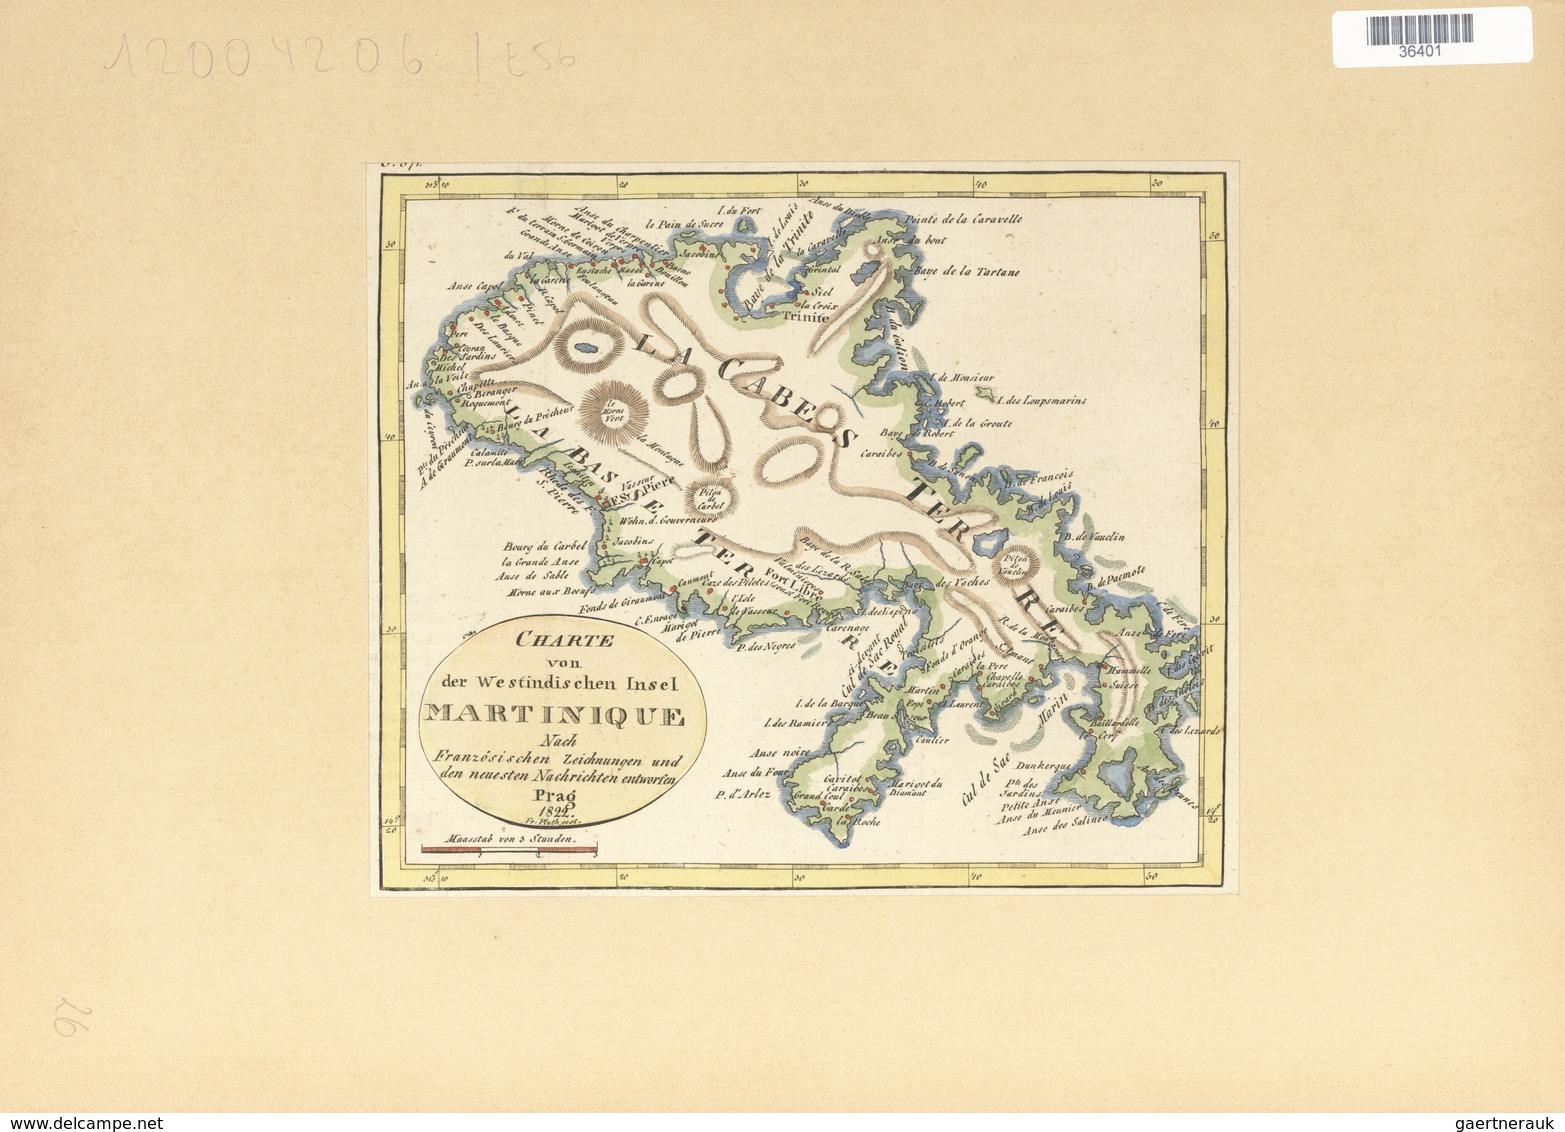 Landkarten Und Stiche: 1822. Map Of The Island Of Martinique, By One Fr. Pluth, From Prague In 1822. - Géographie